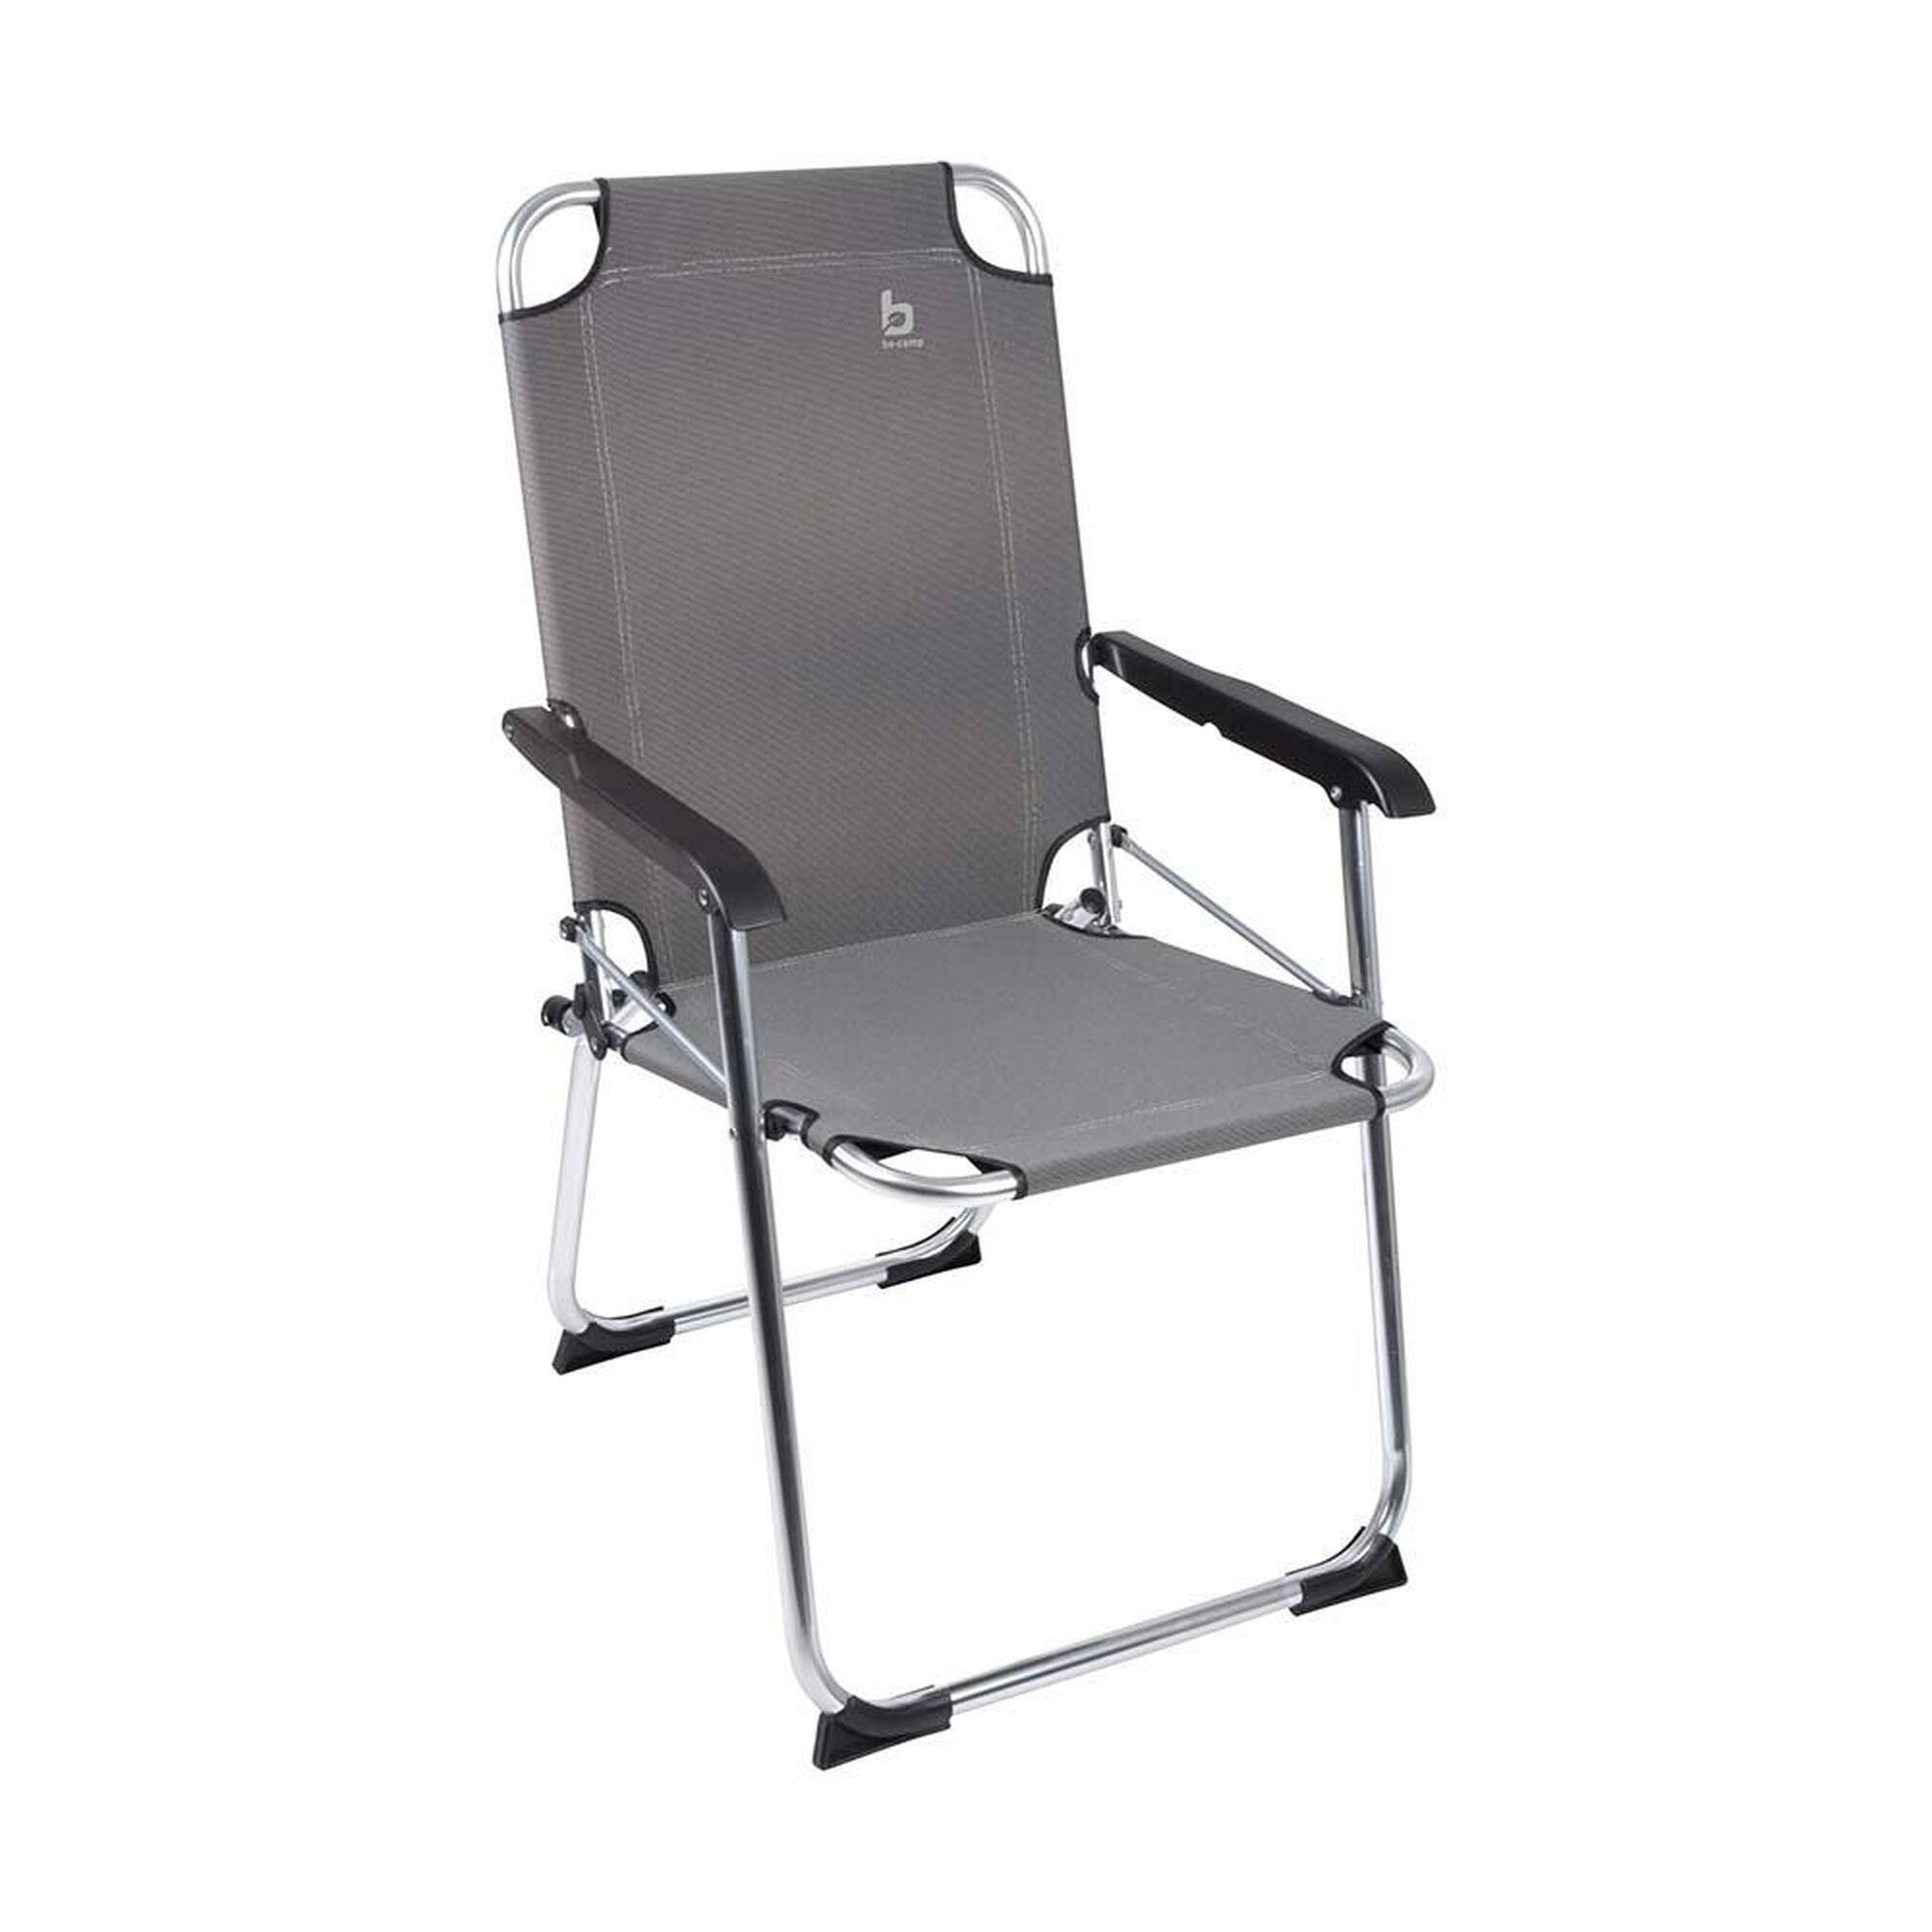 Mil-Tec RELAX SESSEL OLIV Stuhl Camping Outdoor, Stühle